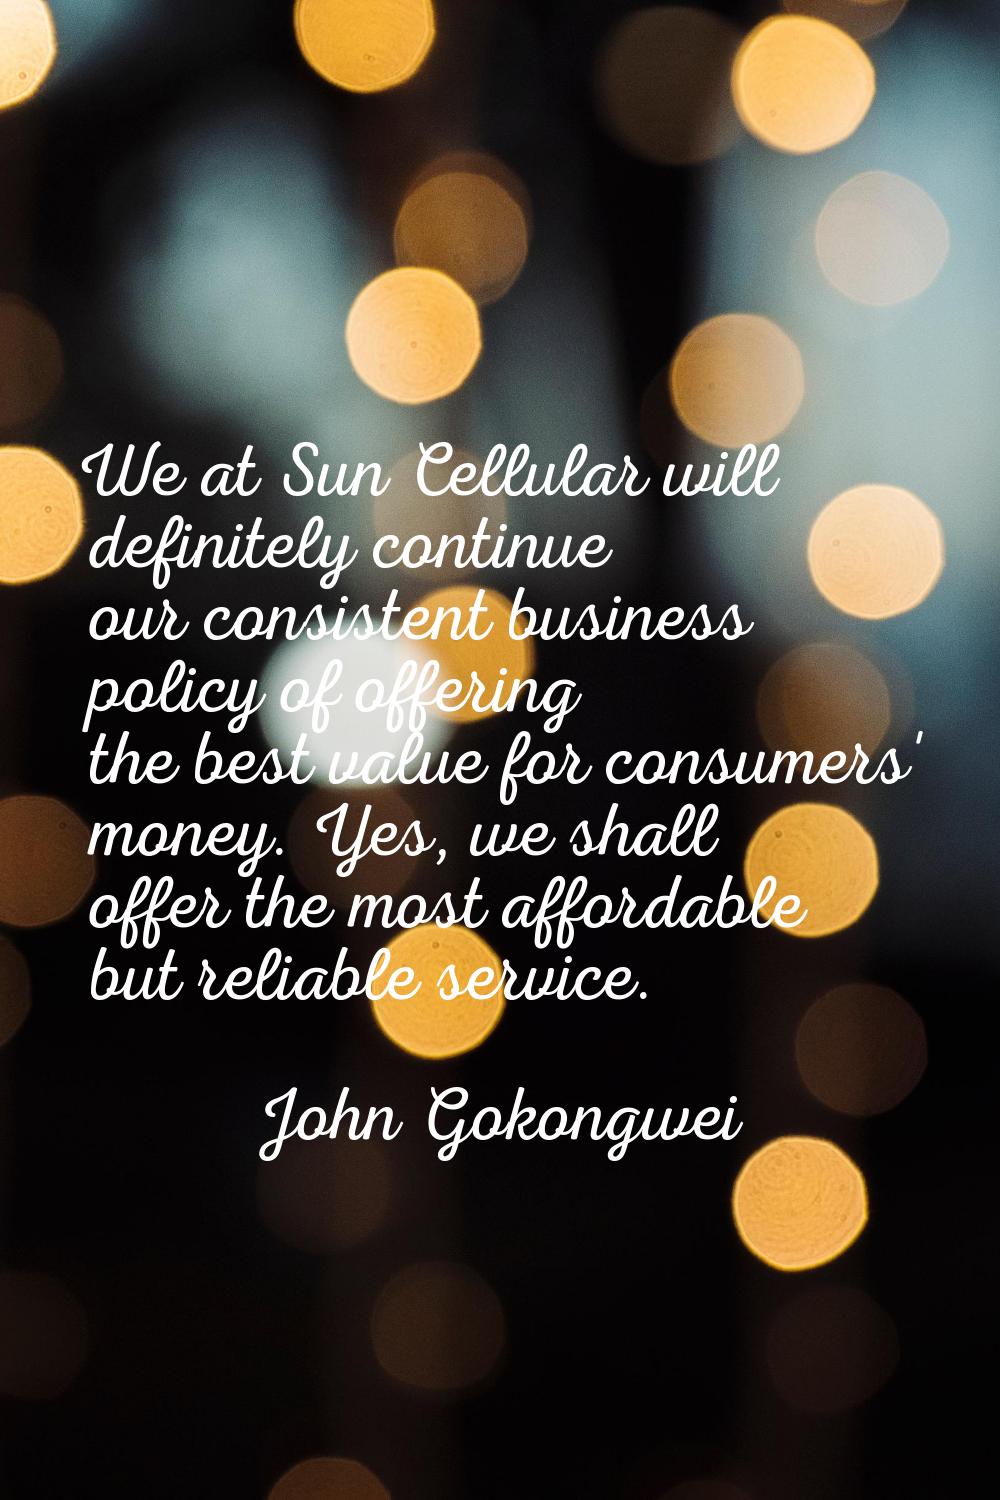 We at Sun Cellular will definitely continue our consistent business policy of offering the best val